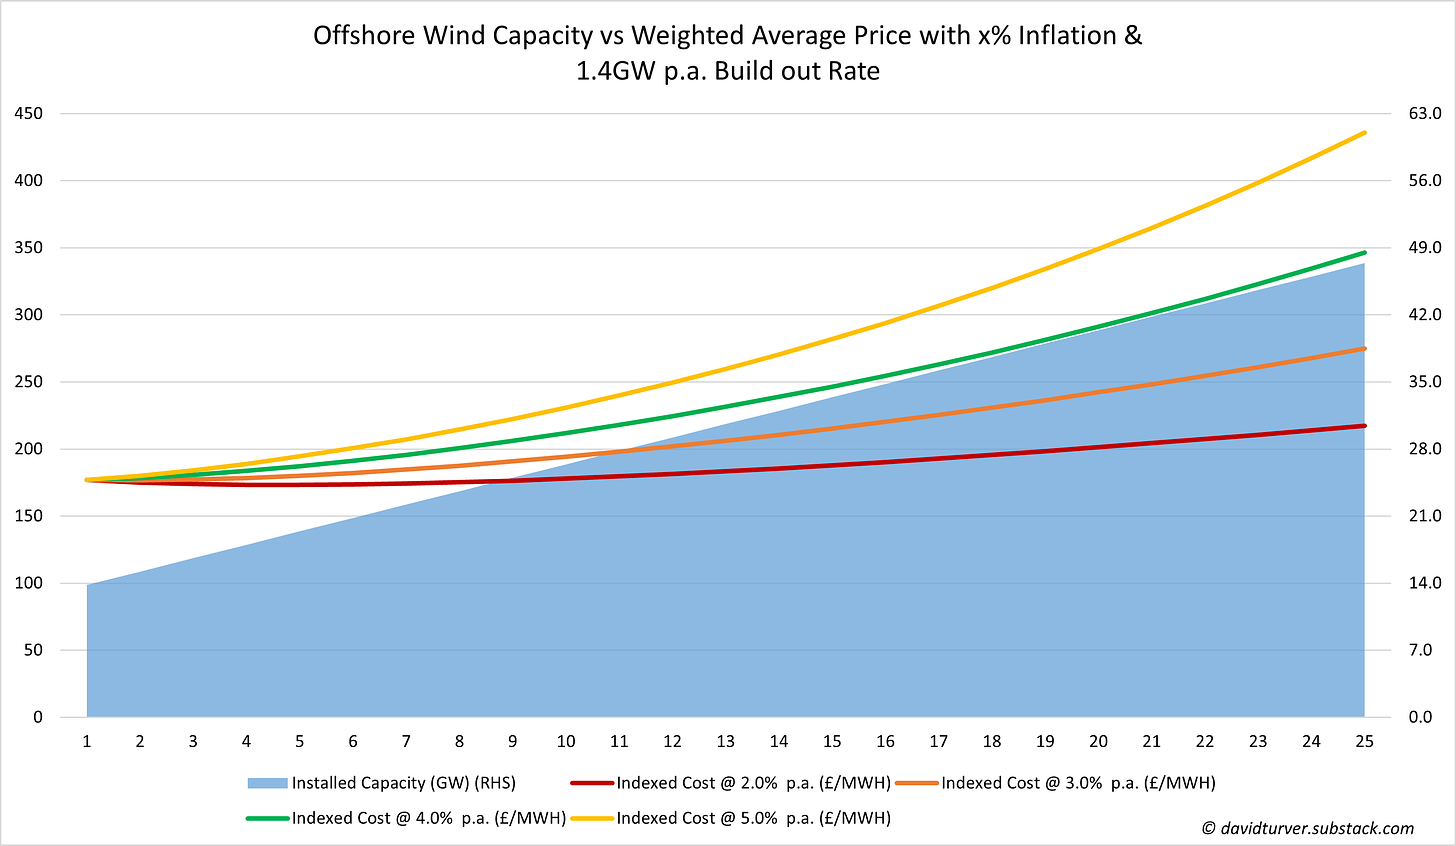 Figure 6 - Offshore Wind Capacity vs Weighted Average Price with x% Inflation + 1.4GW Build Out Rate